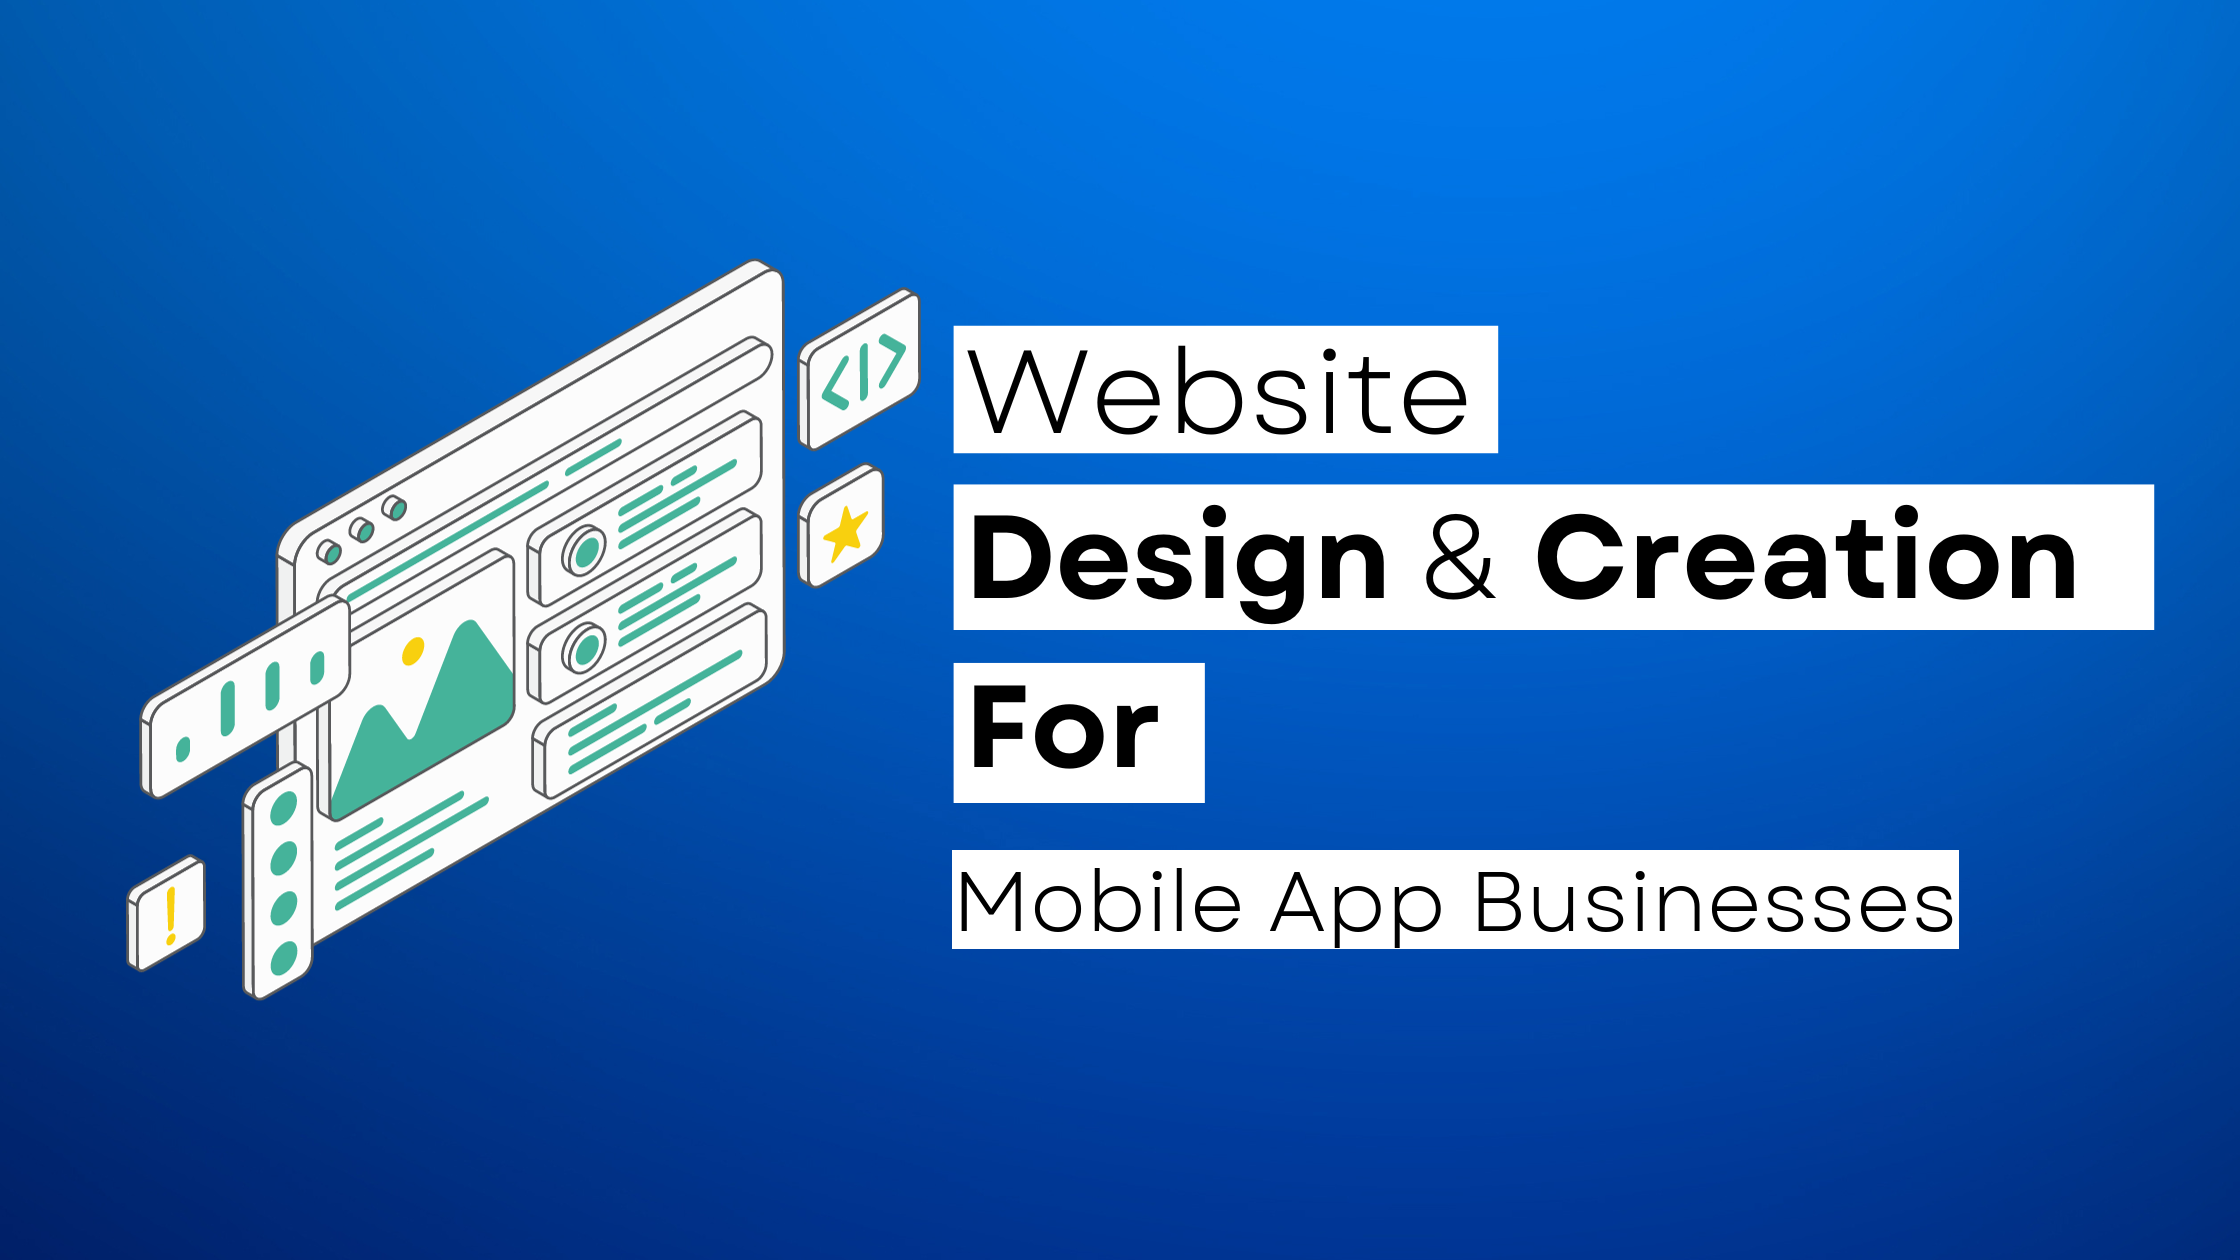 How to start a Mobile App website